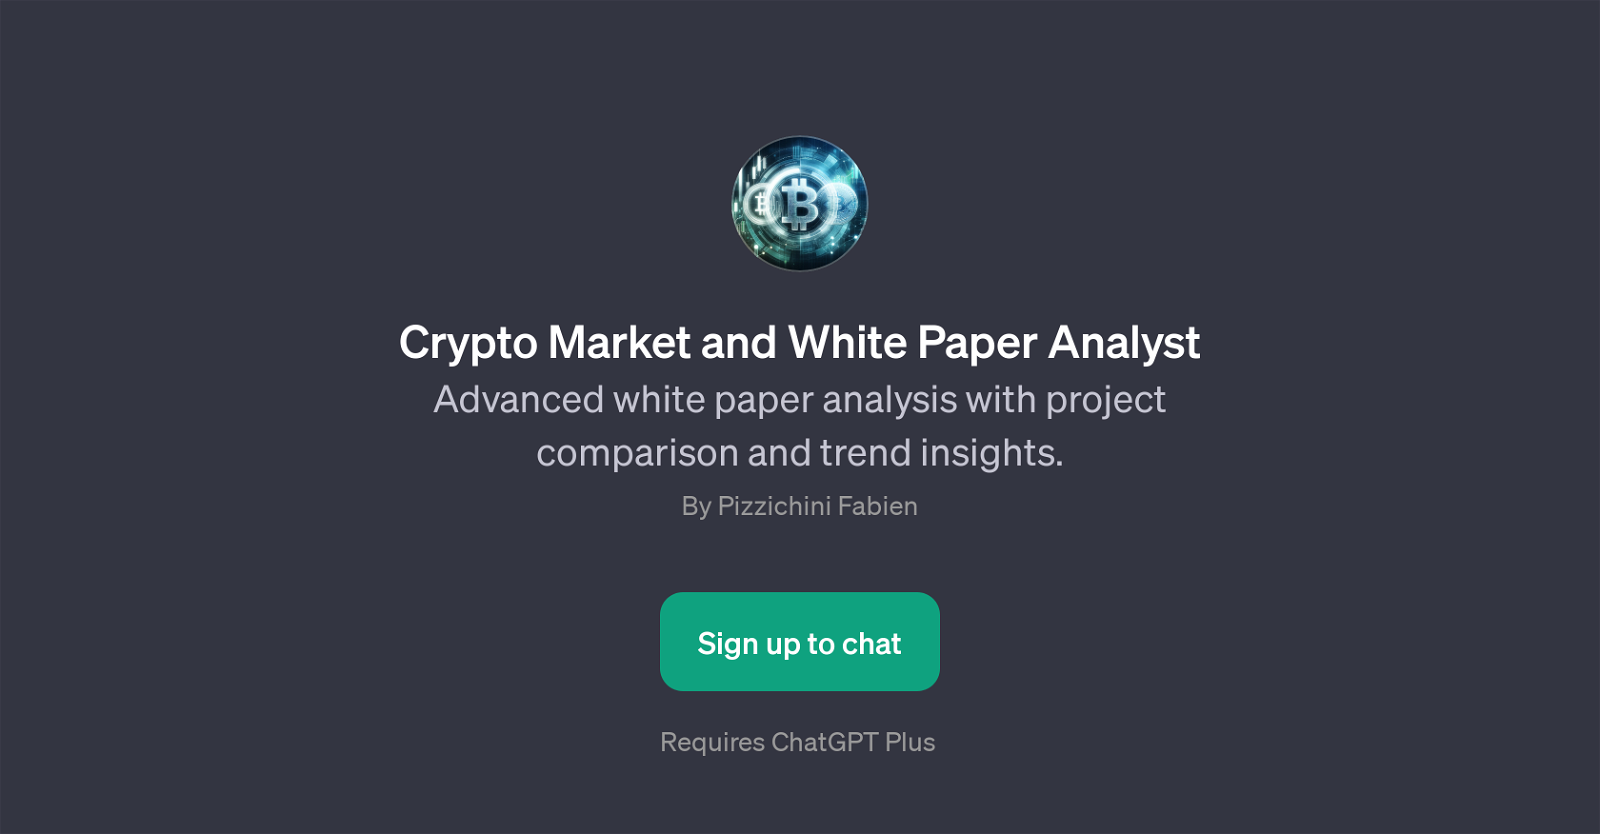 Crypto Market and White Paper Analyst website